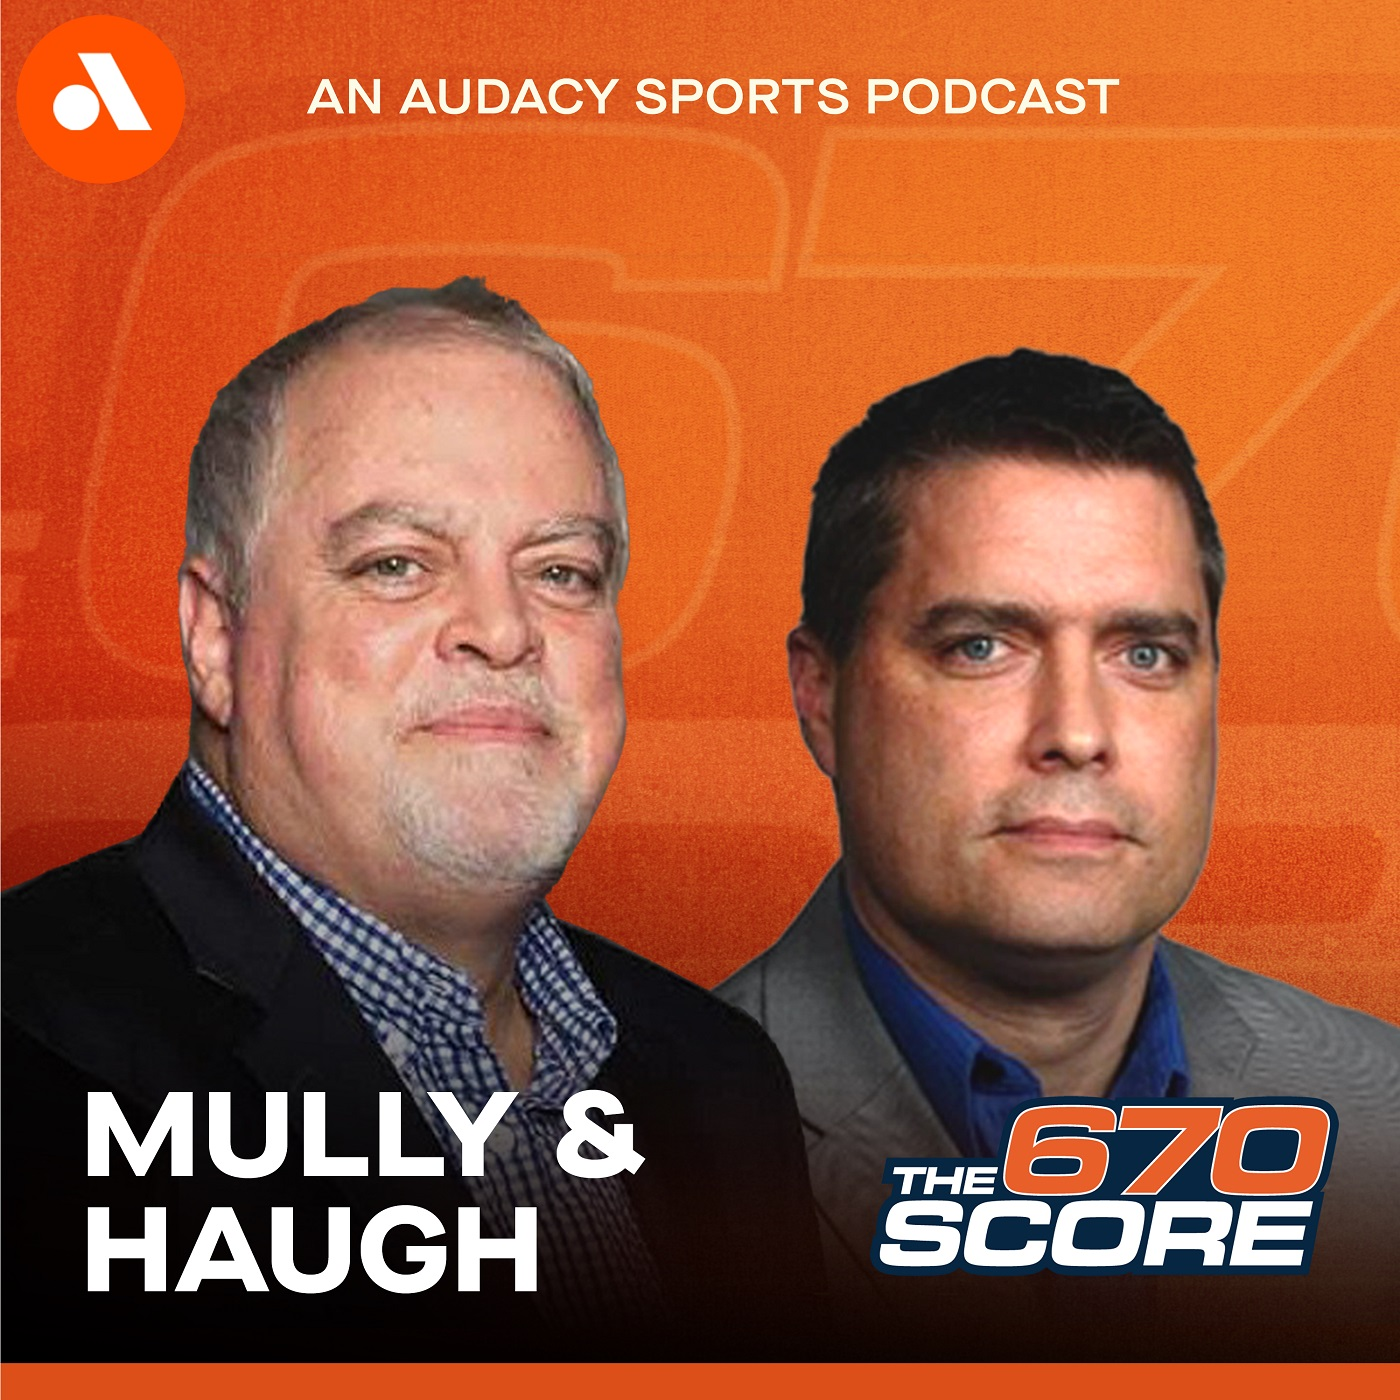 Mully & Haugh: Pick 6, Mark Cannizzaro interview (Hour 2)